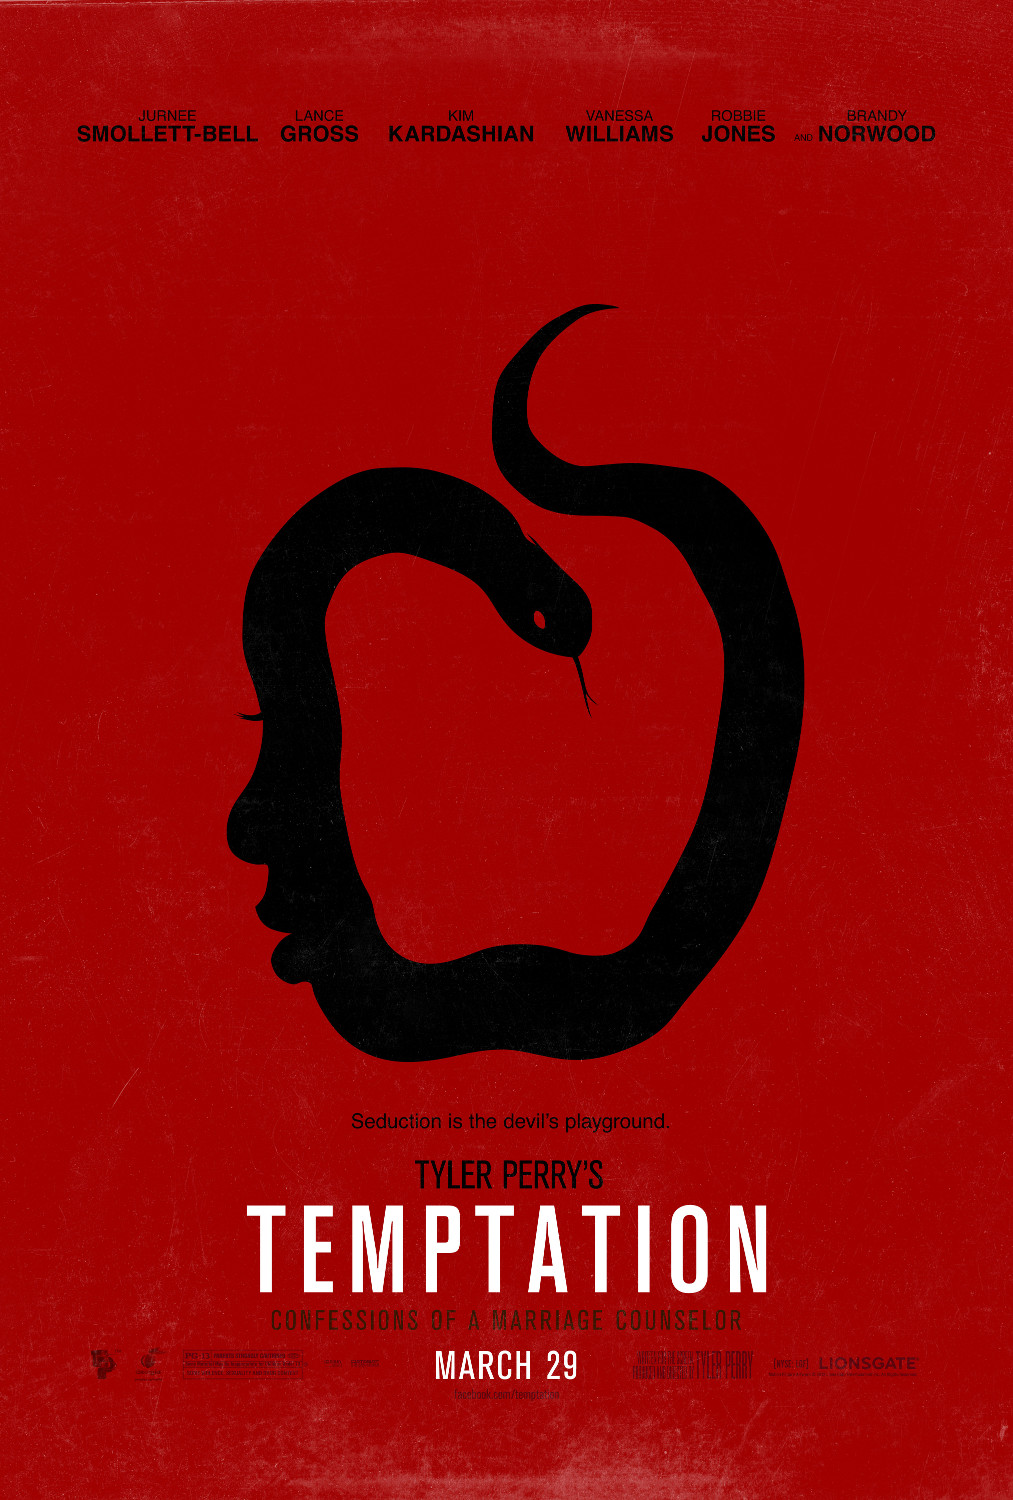 Tyler Perry's Temptation: Confessions of a Marriage Counselor - Poster (2013)